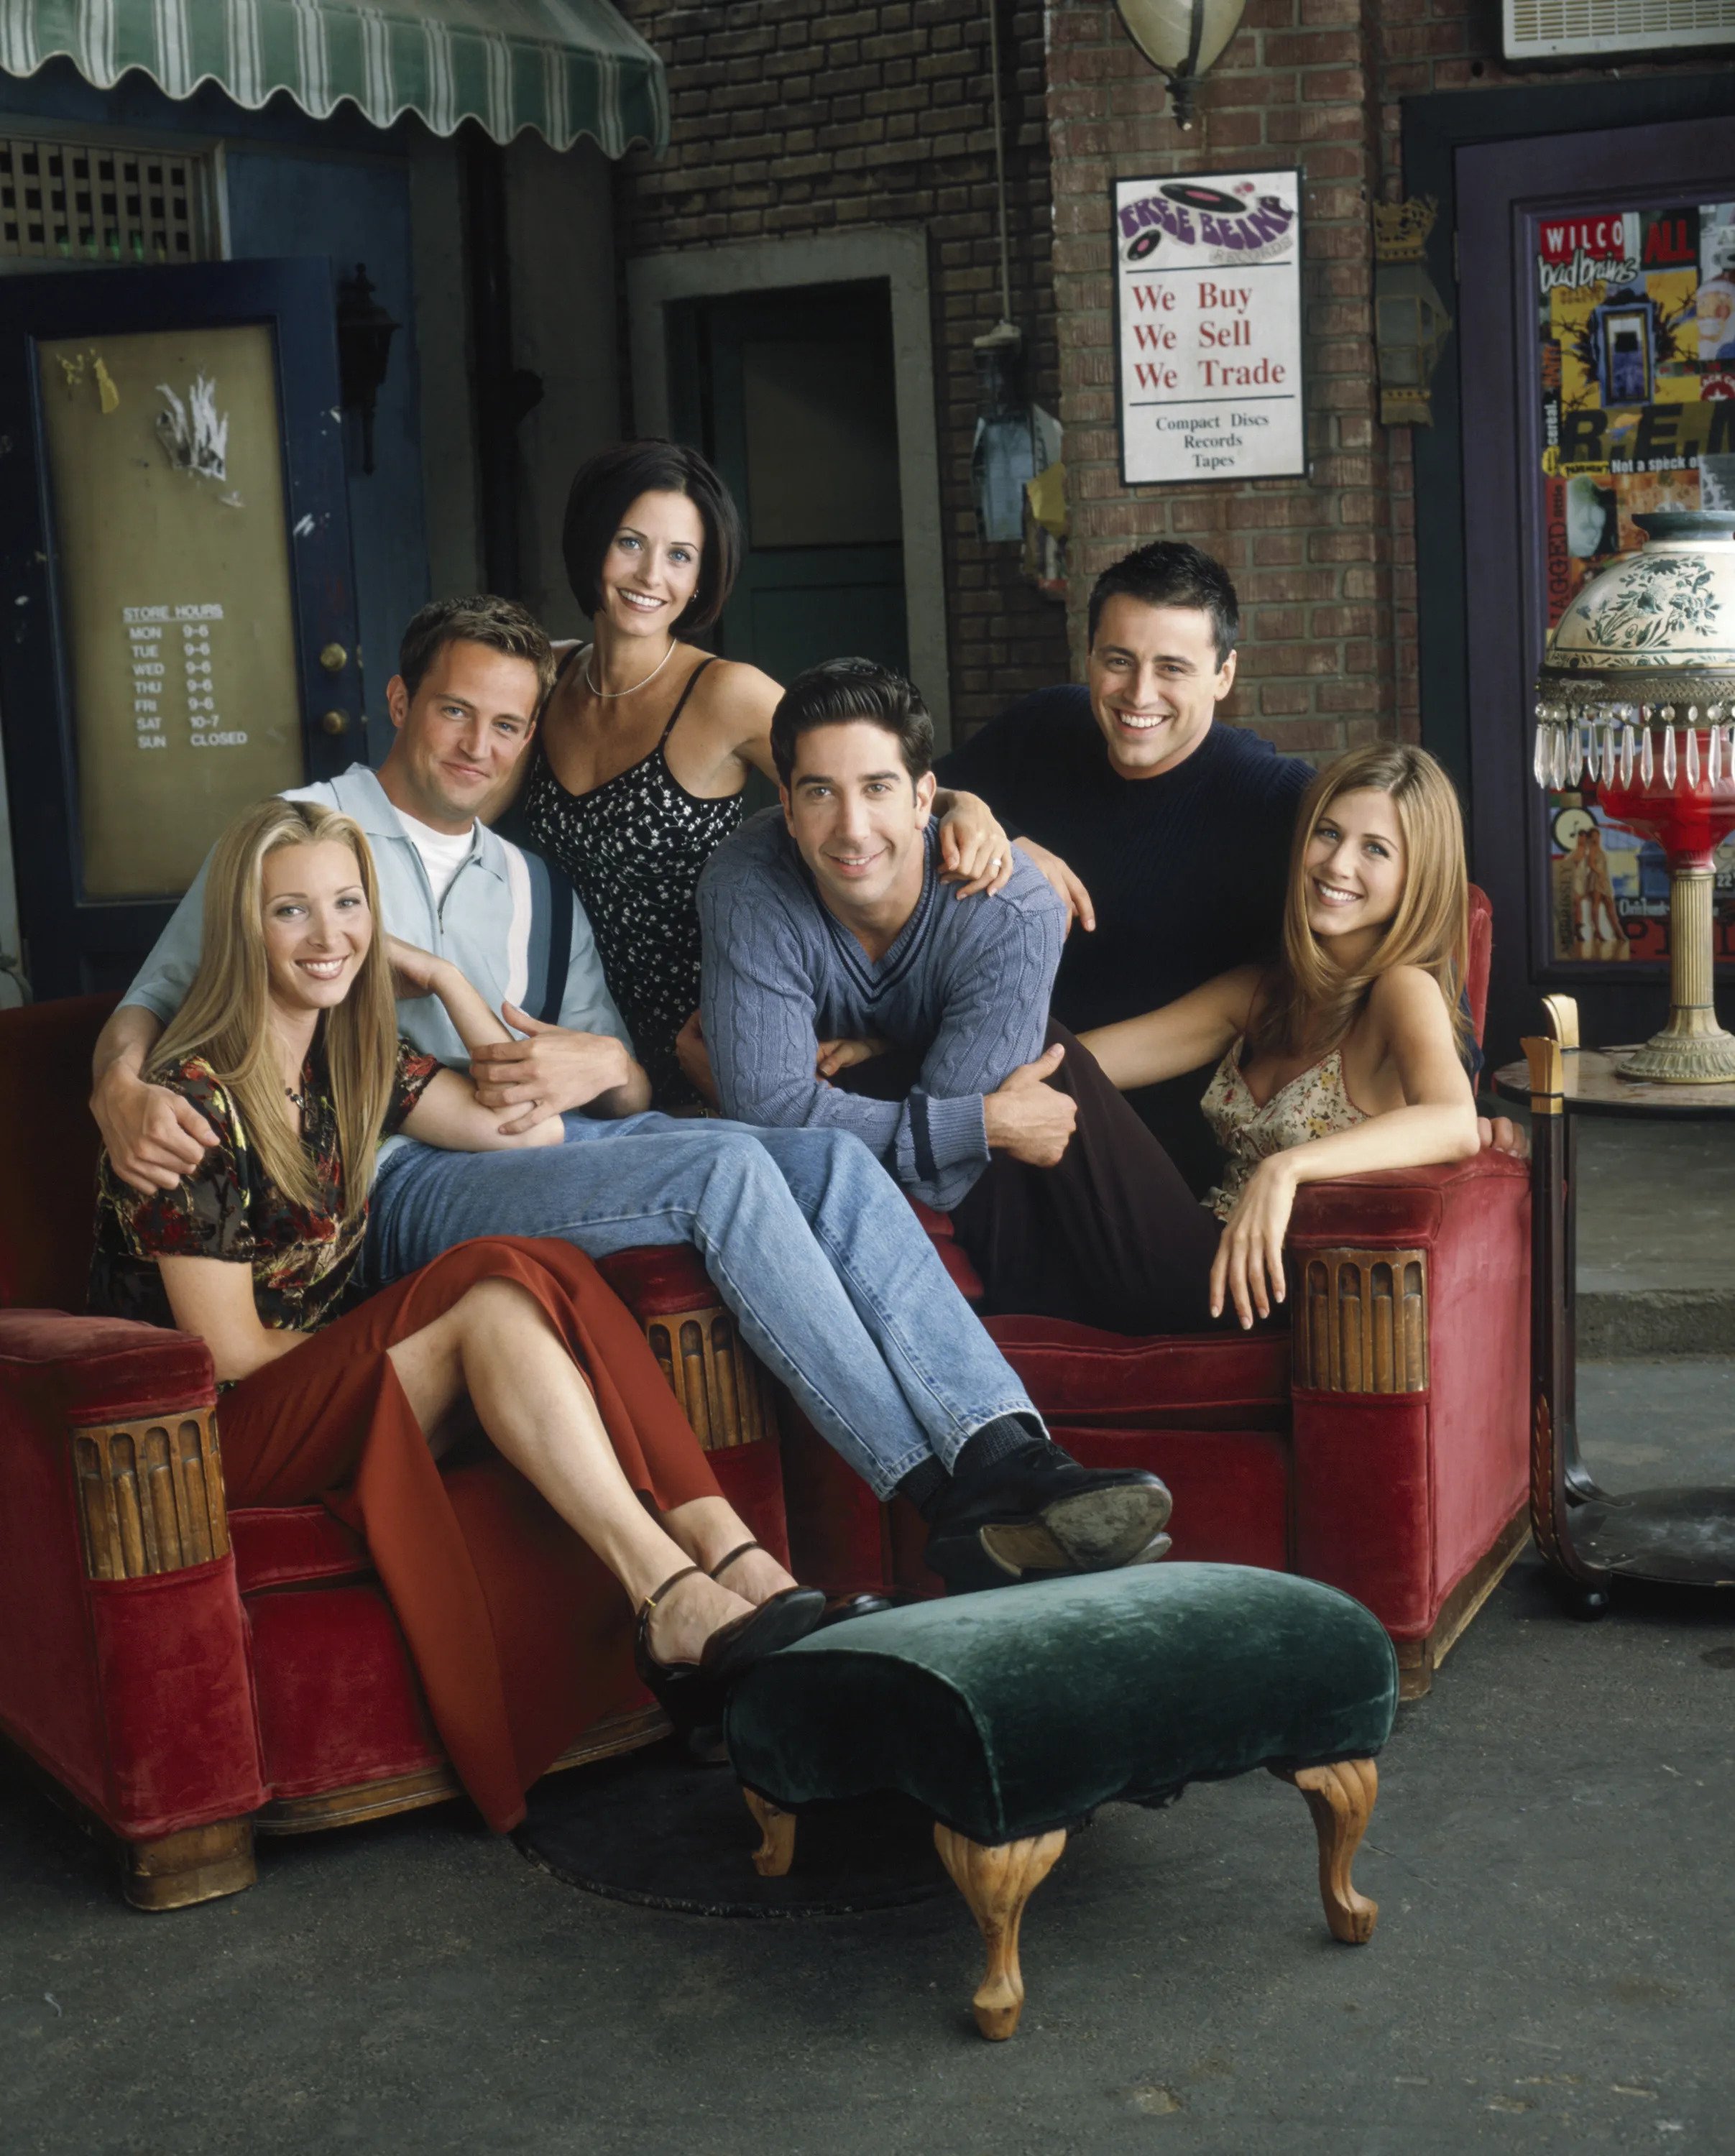 The six main characters of friends sitting on sofas